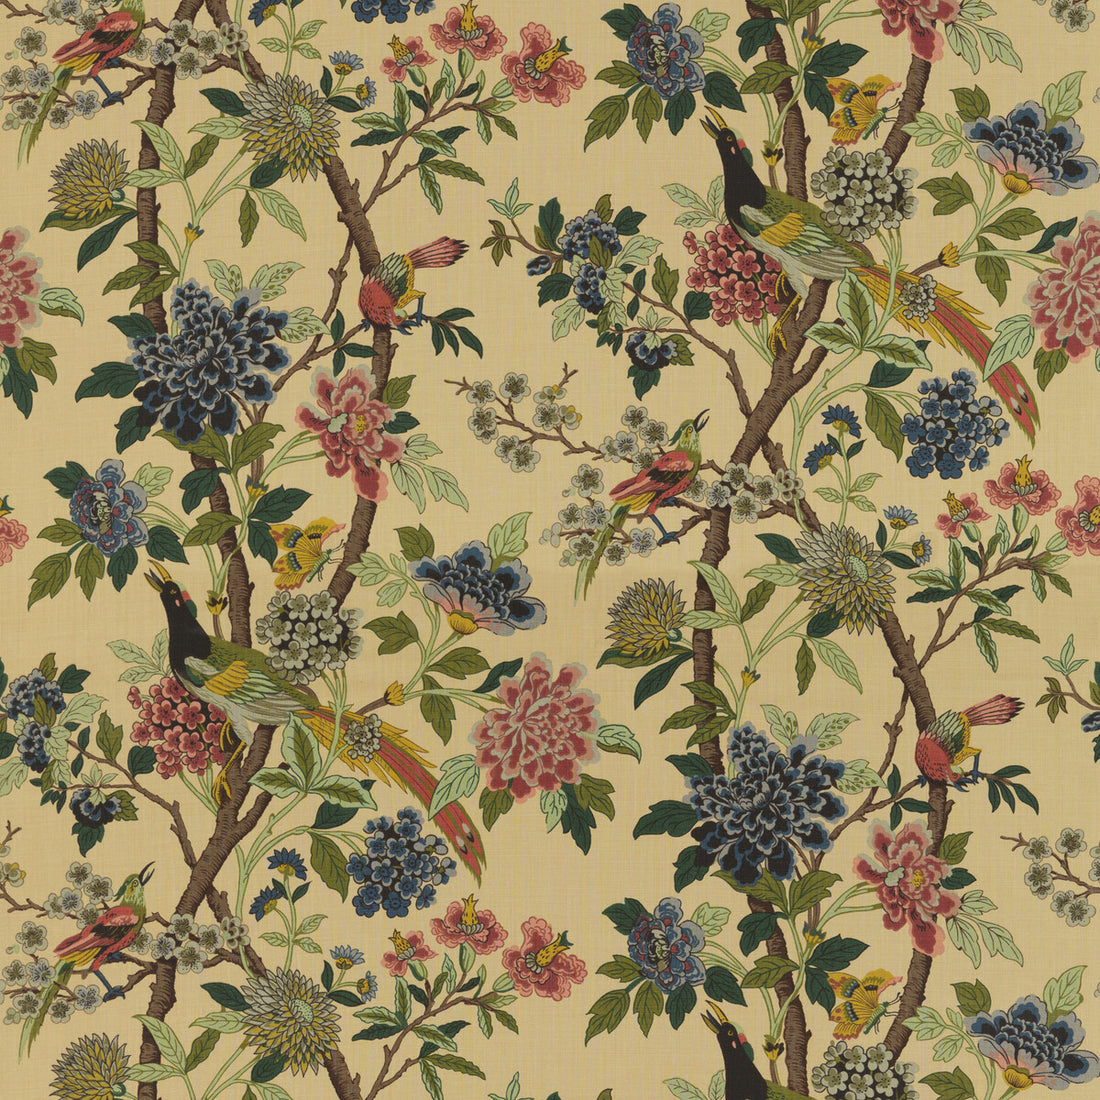 Hydrangea Bird fabric in parchment color - pattern BP10723.3.0 - by G P &amp; J Baker in the East To West collection